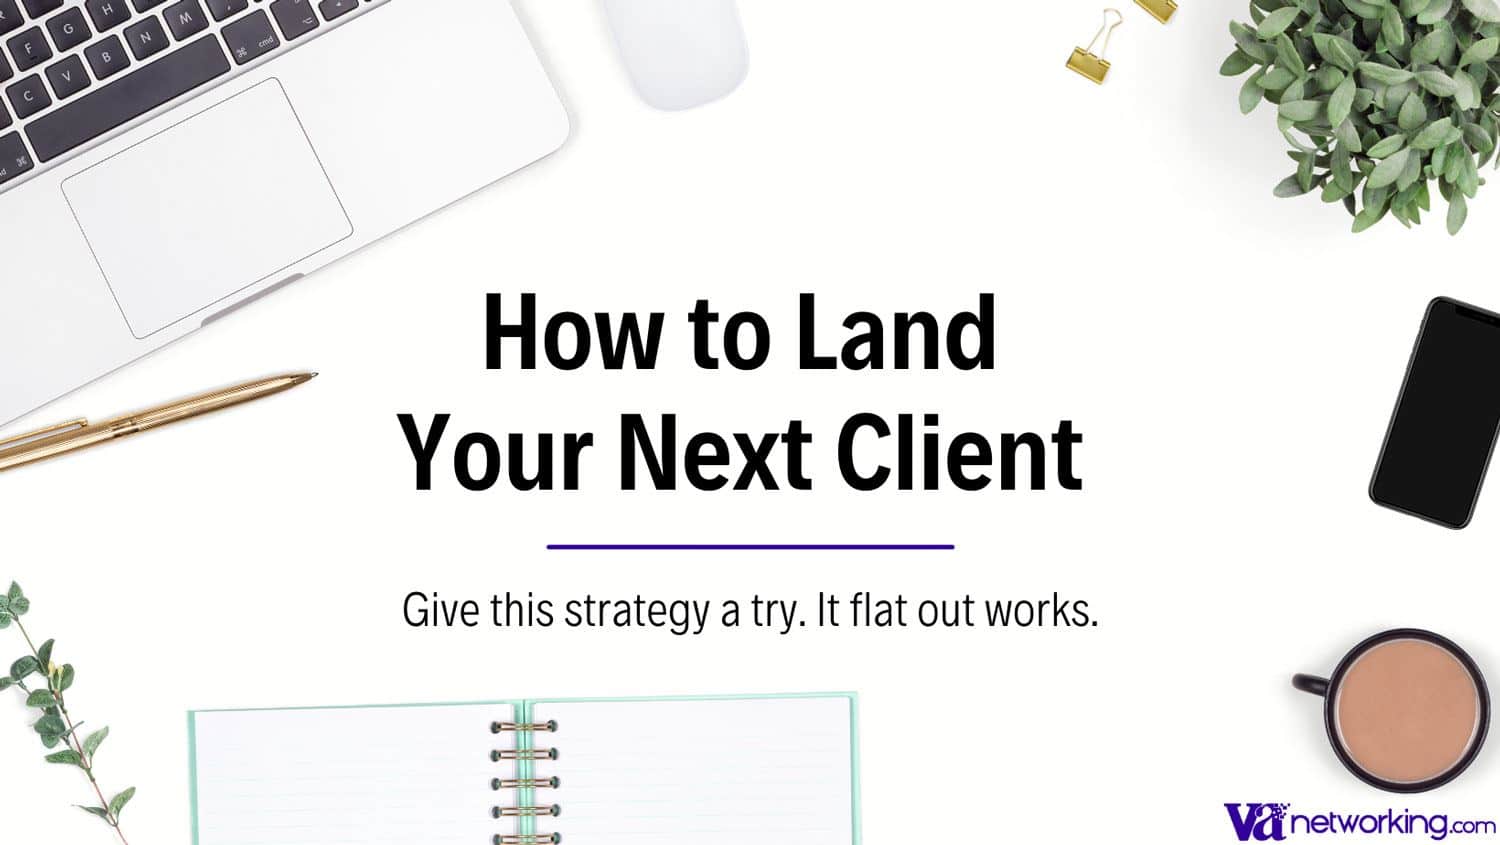 How to Land Your Next Client